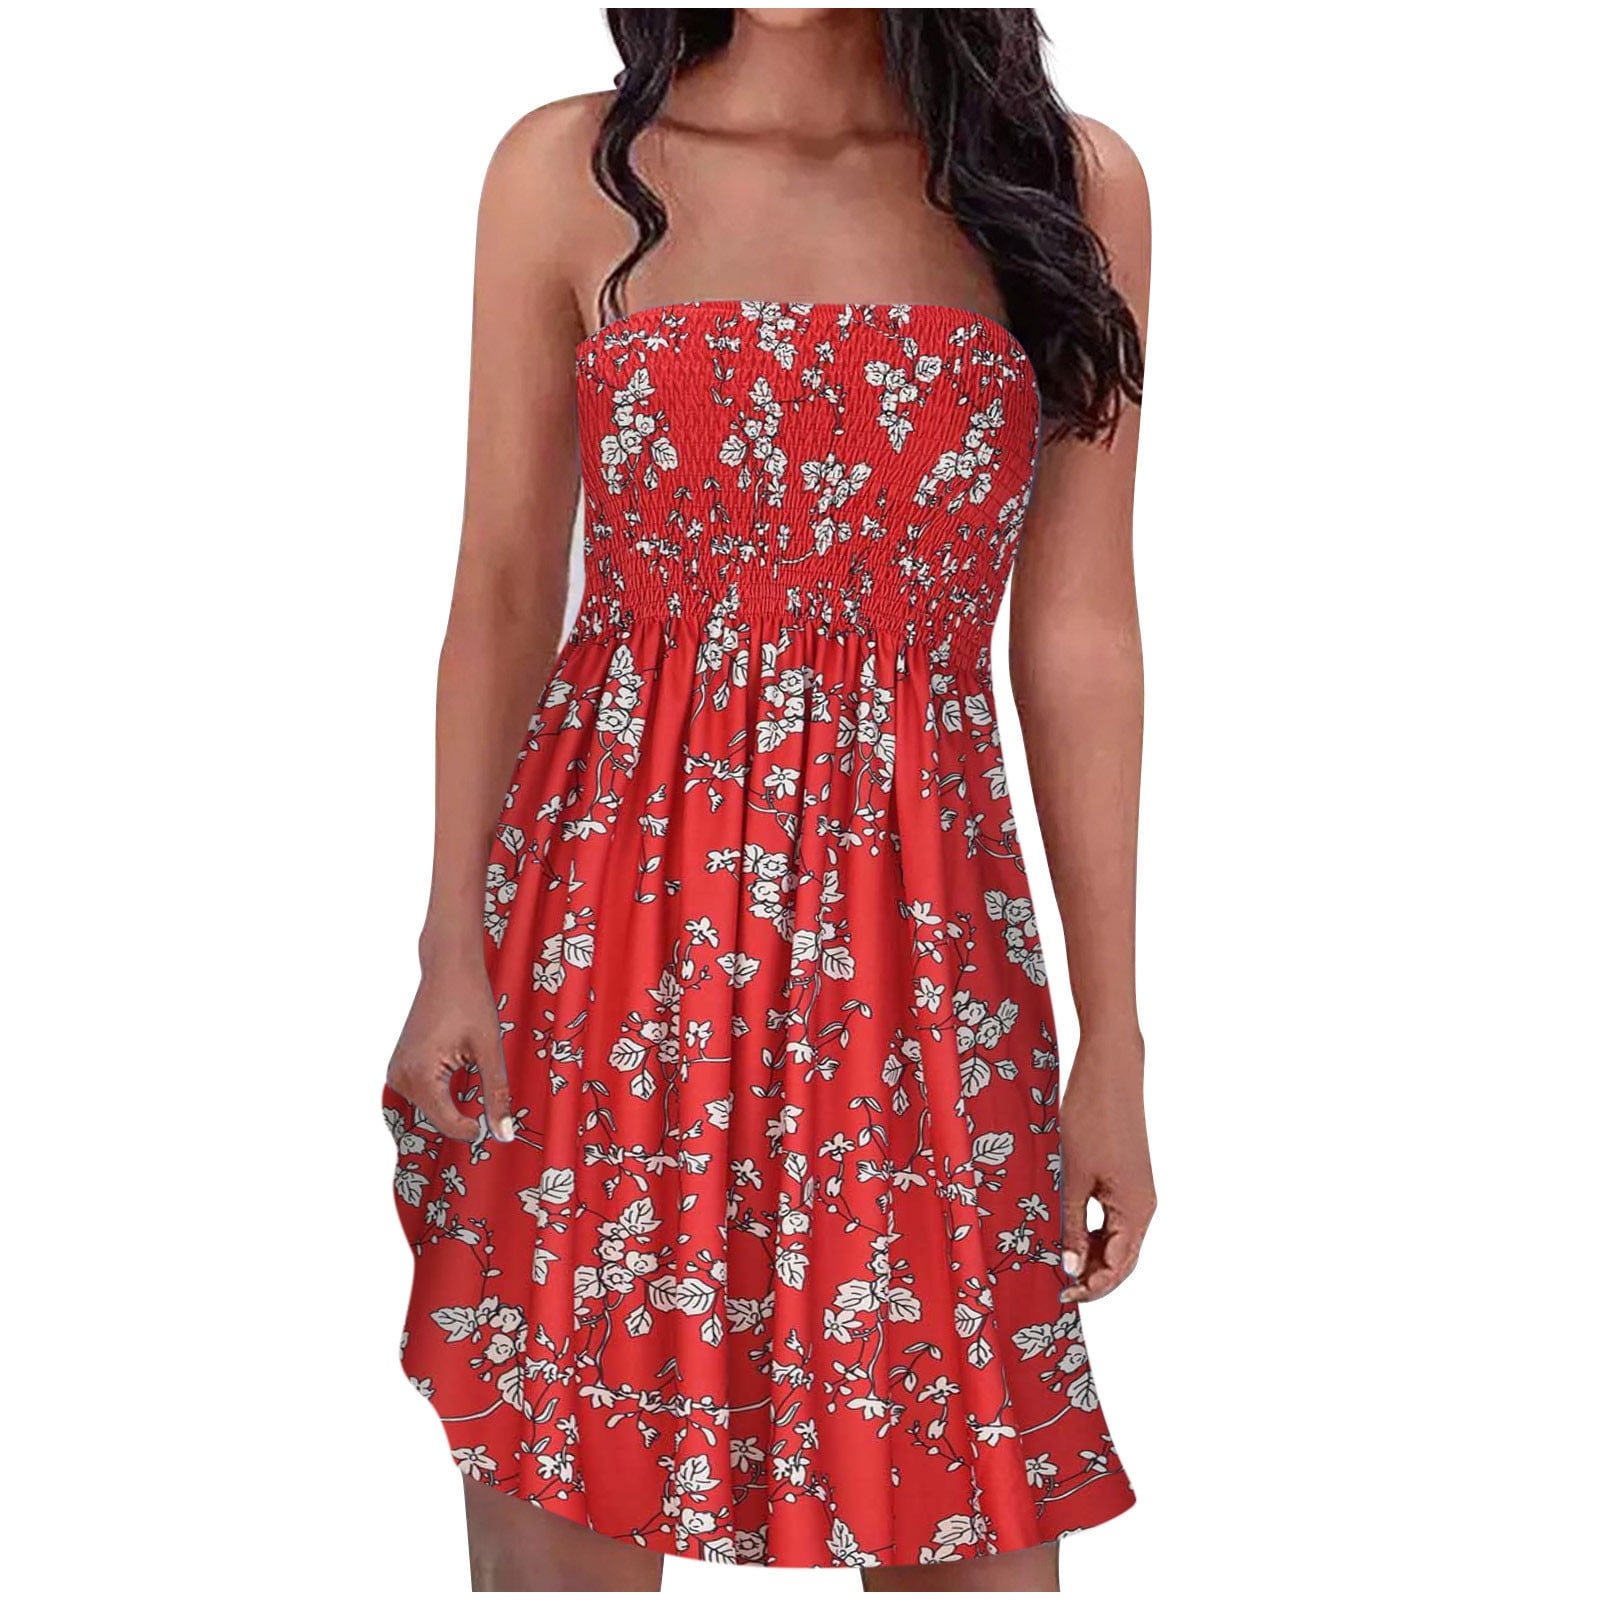 Casual Summer Dress for Women,Sleeveless Off Shoulder Floral Print Dress Cocktail Party Swing Flowy Tube Top Dress 